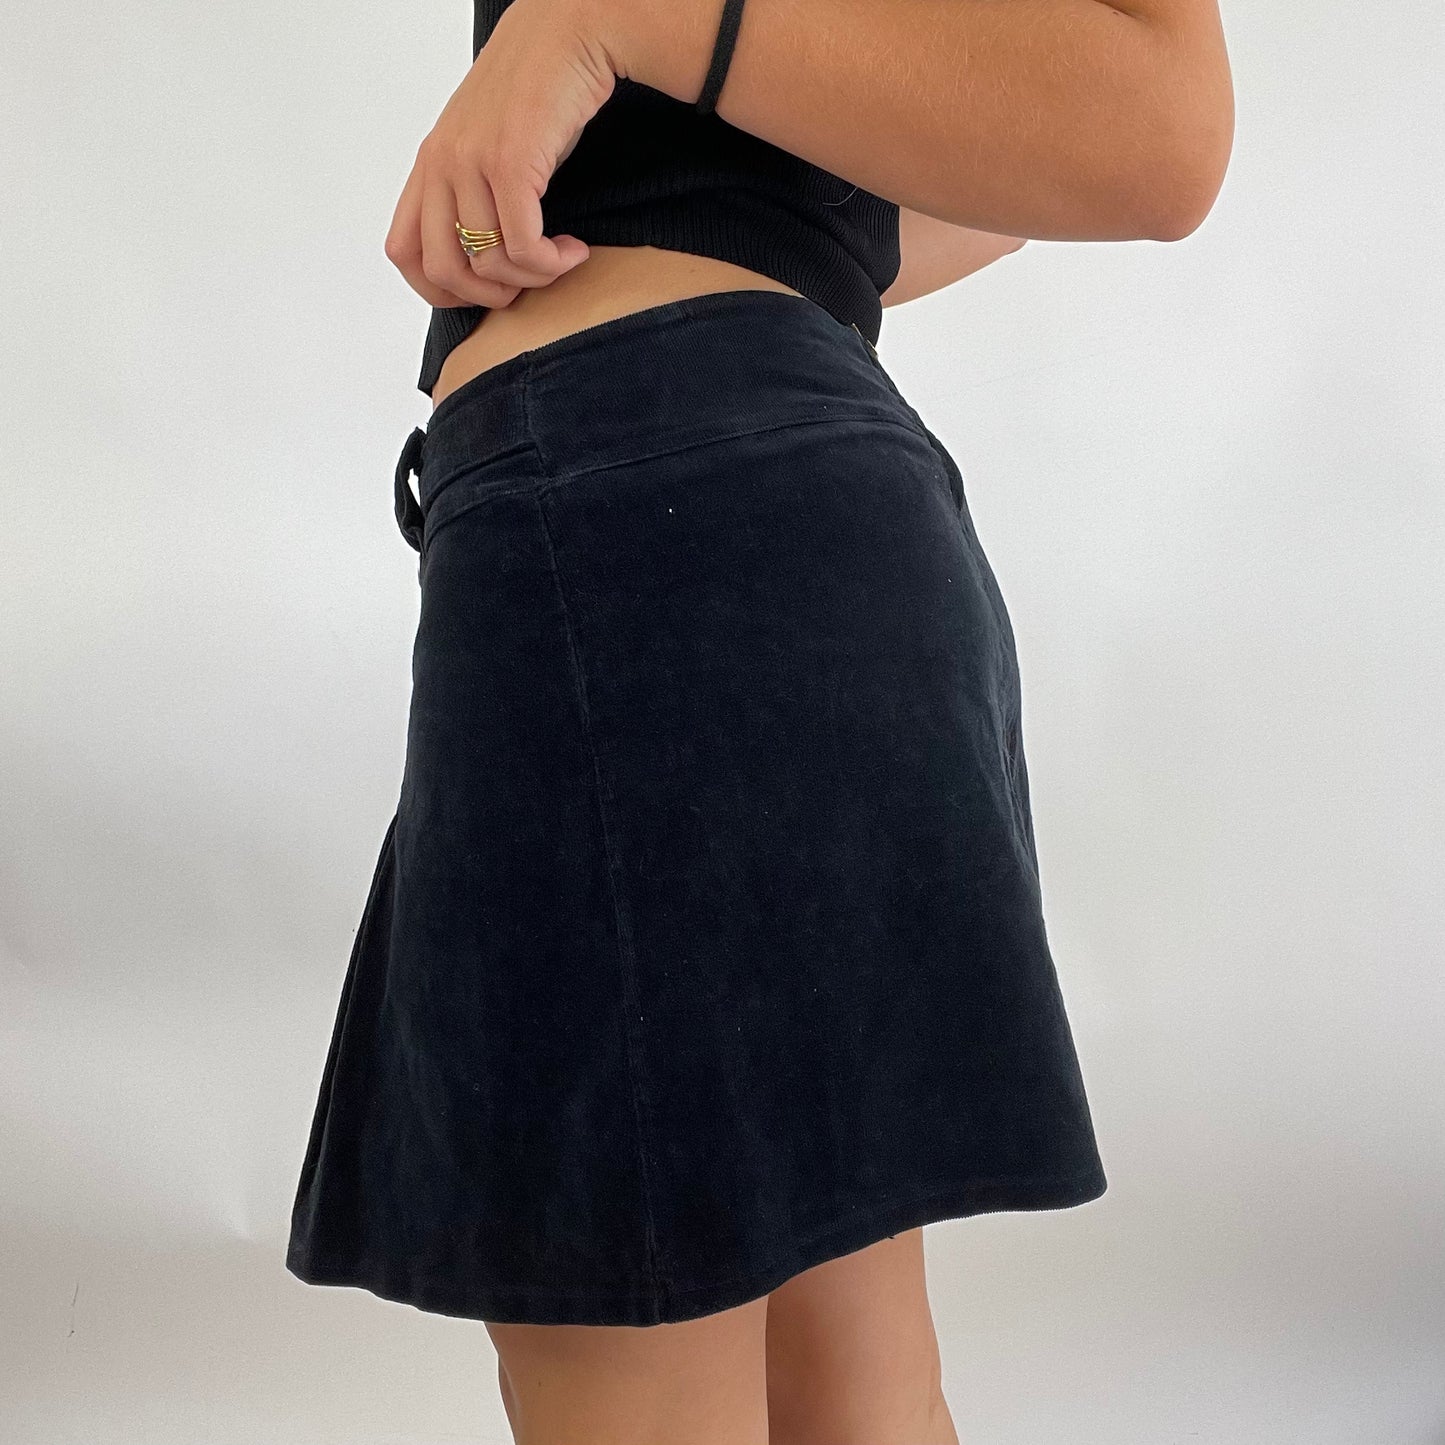 MODEL OFF DUTY DROP | small black corduroy skirt with buckle